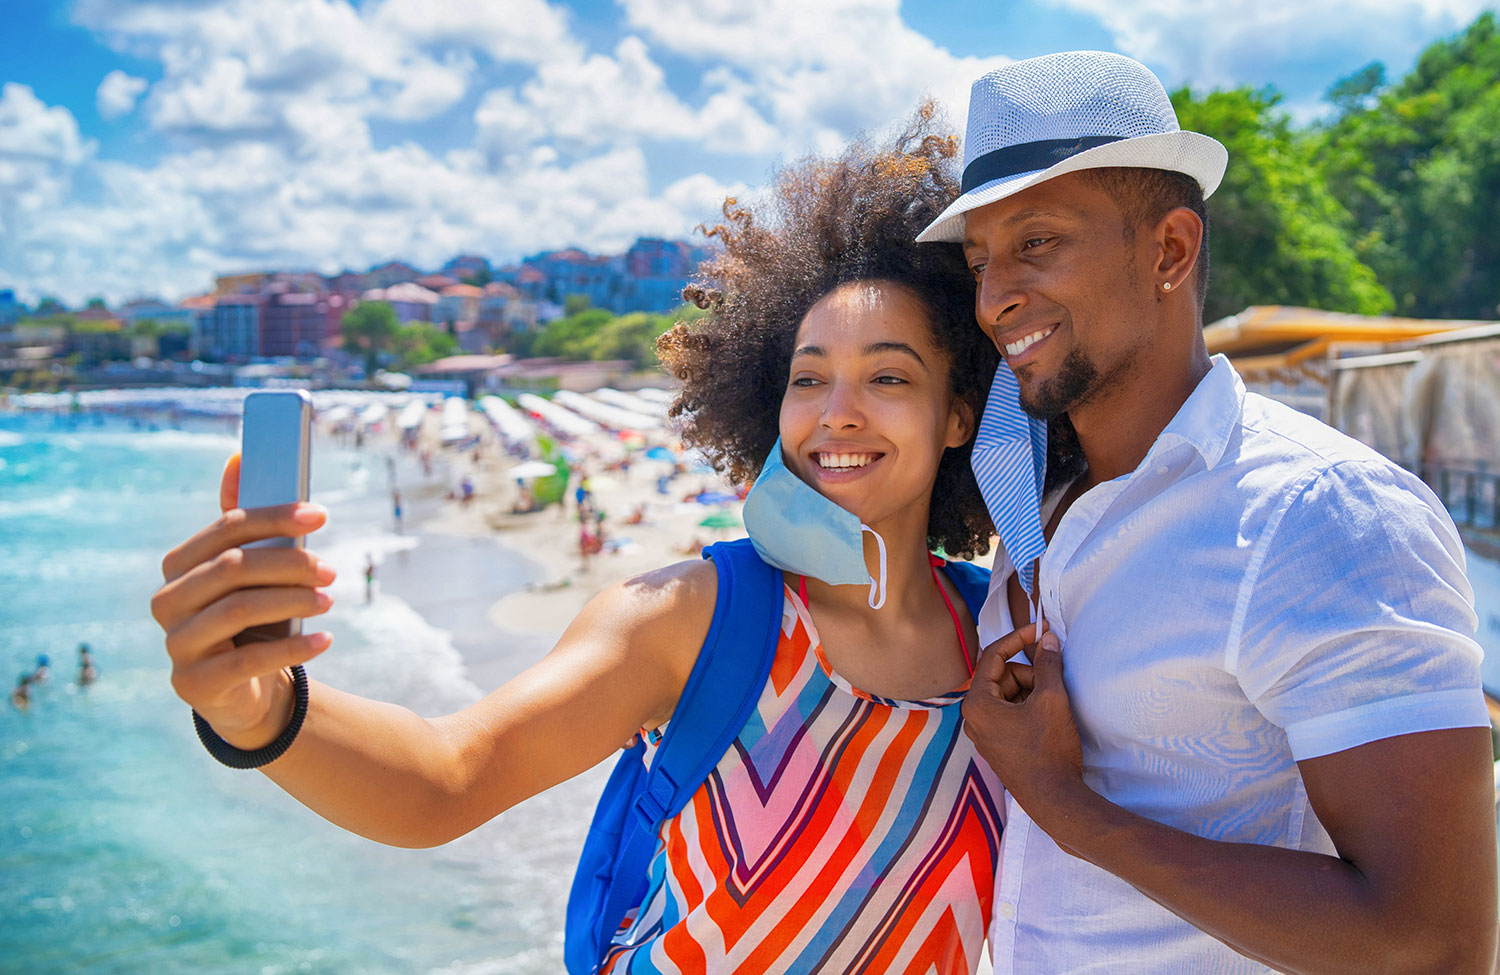 A smiling couple taking a selfie on vacation